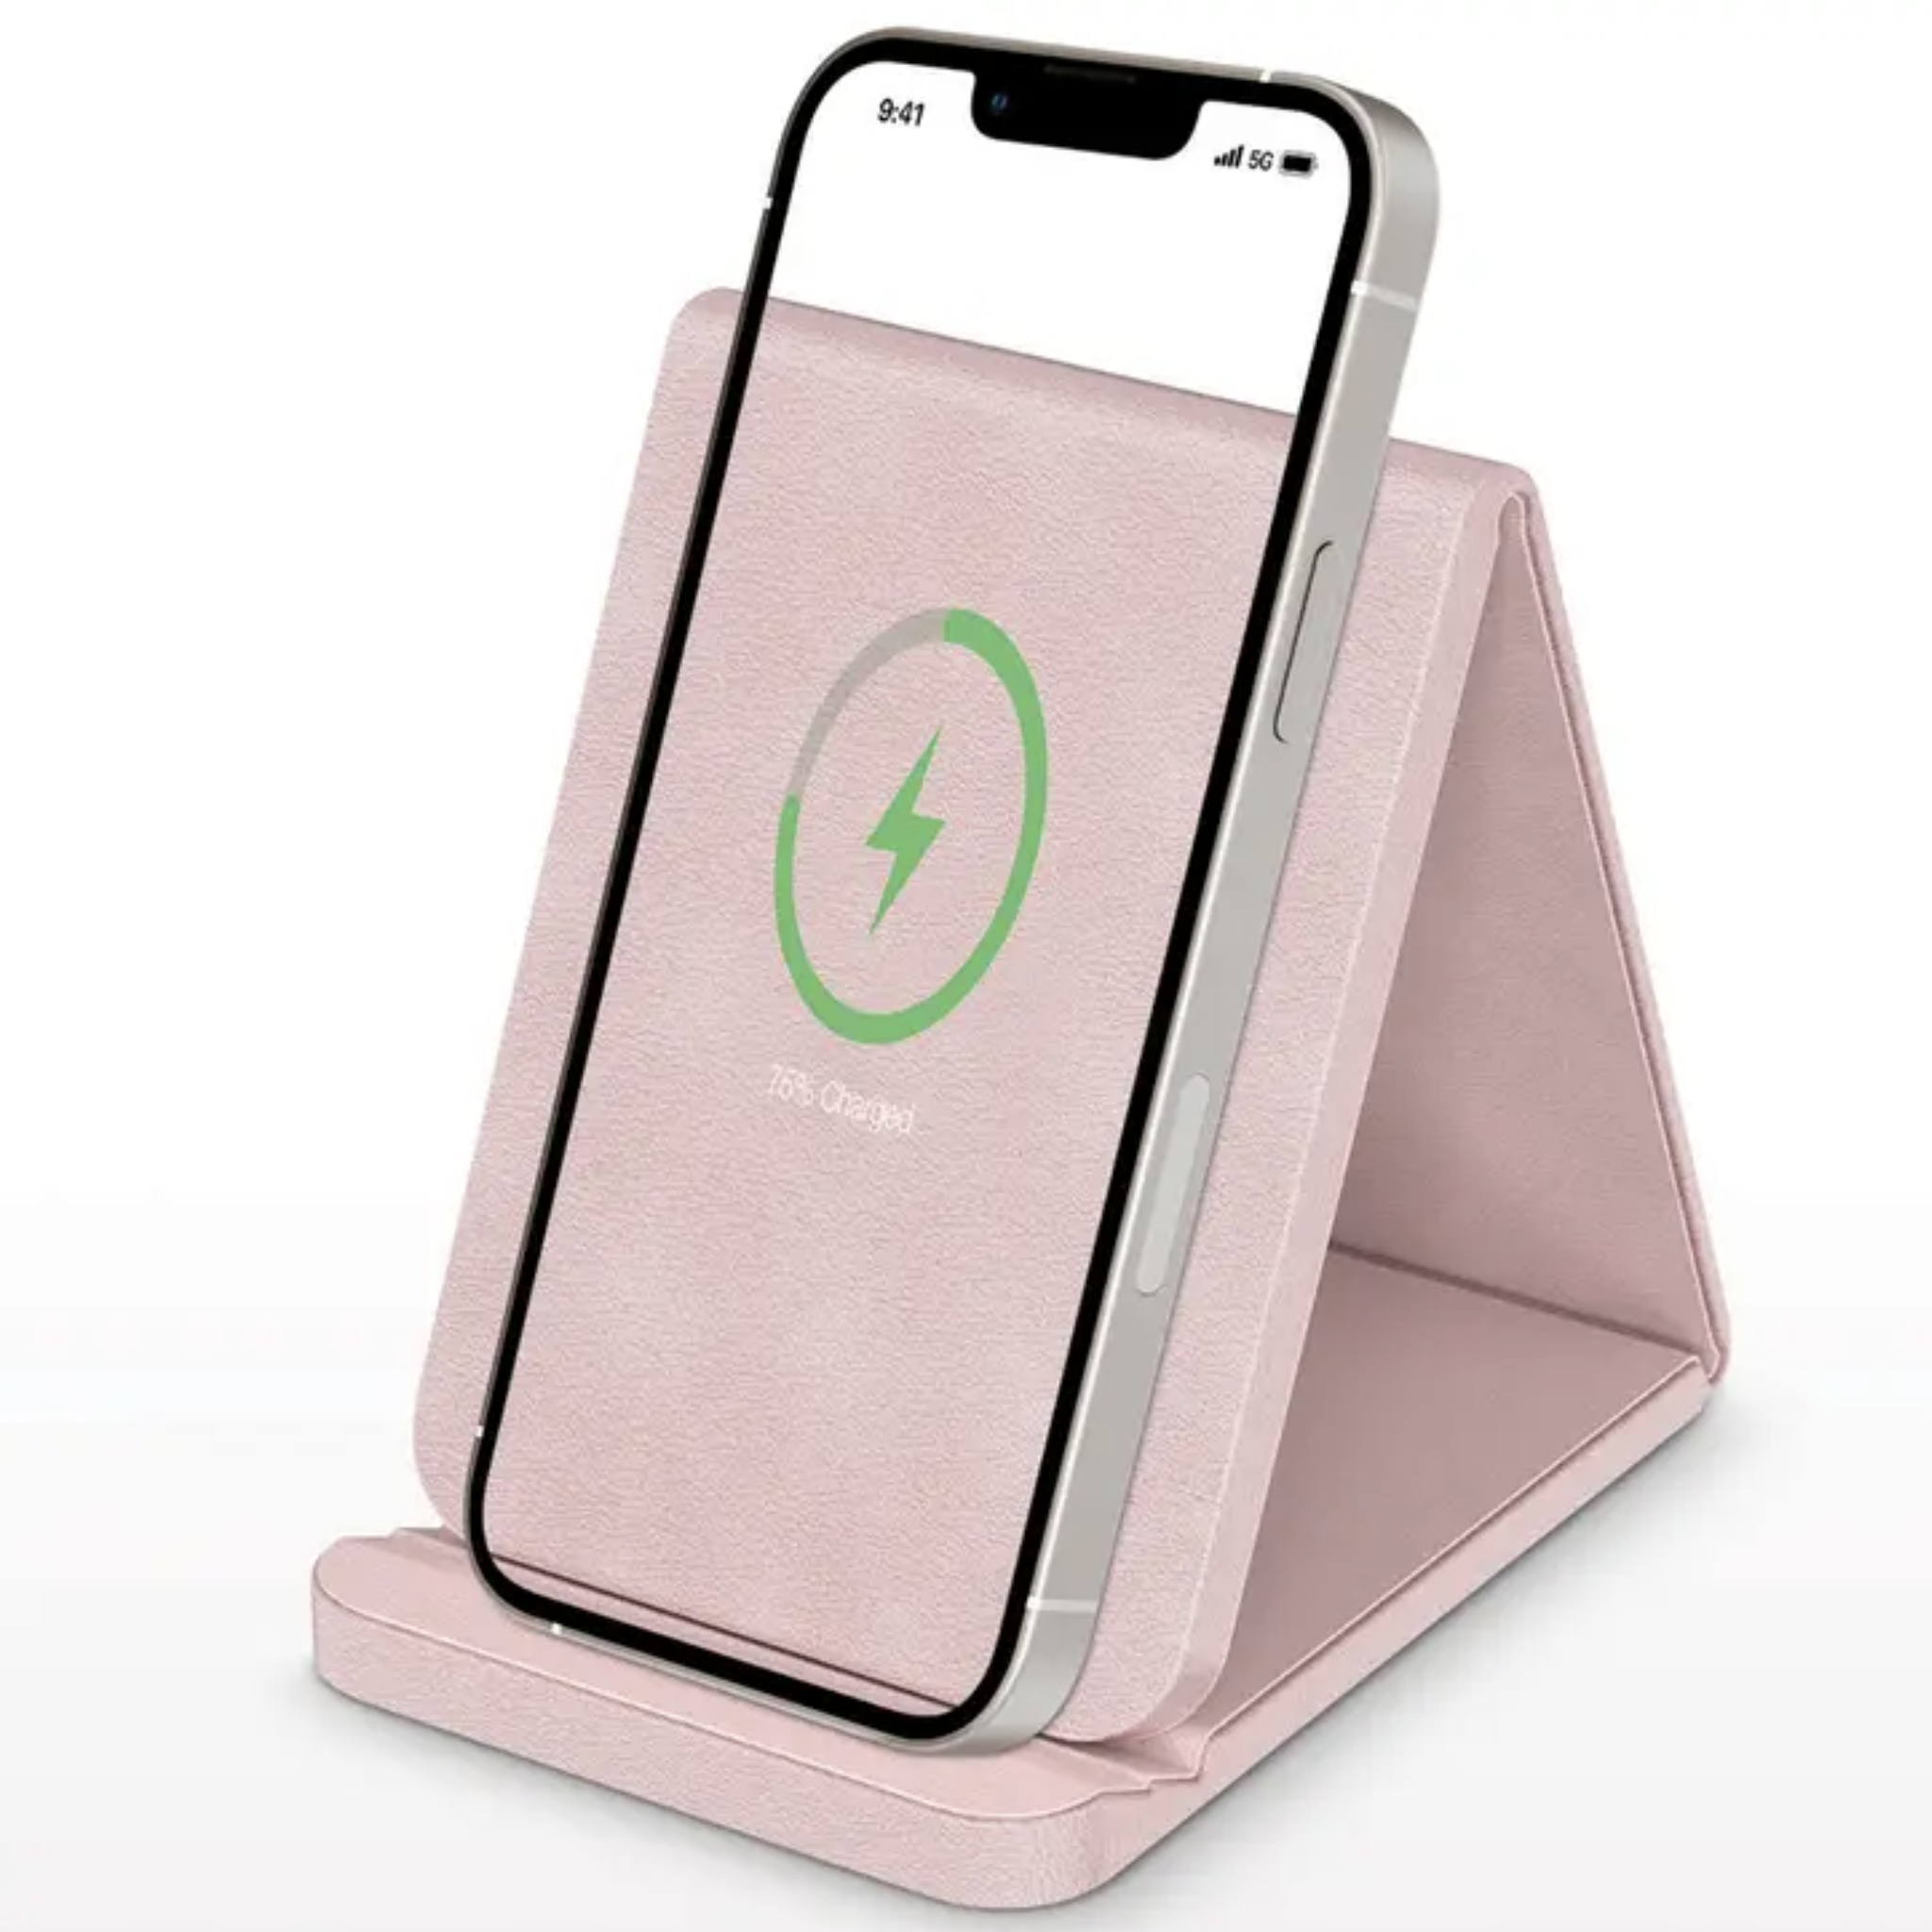 Leather Wireless Charging Folding Stand & Pad